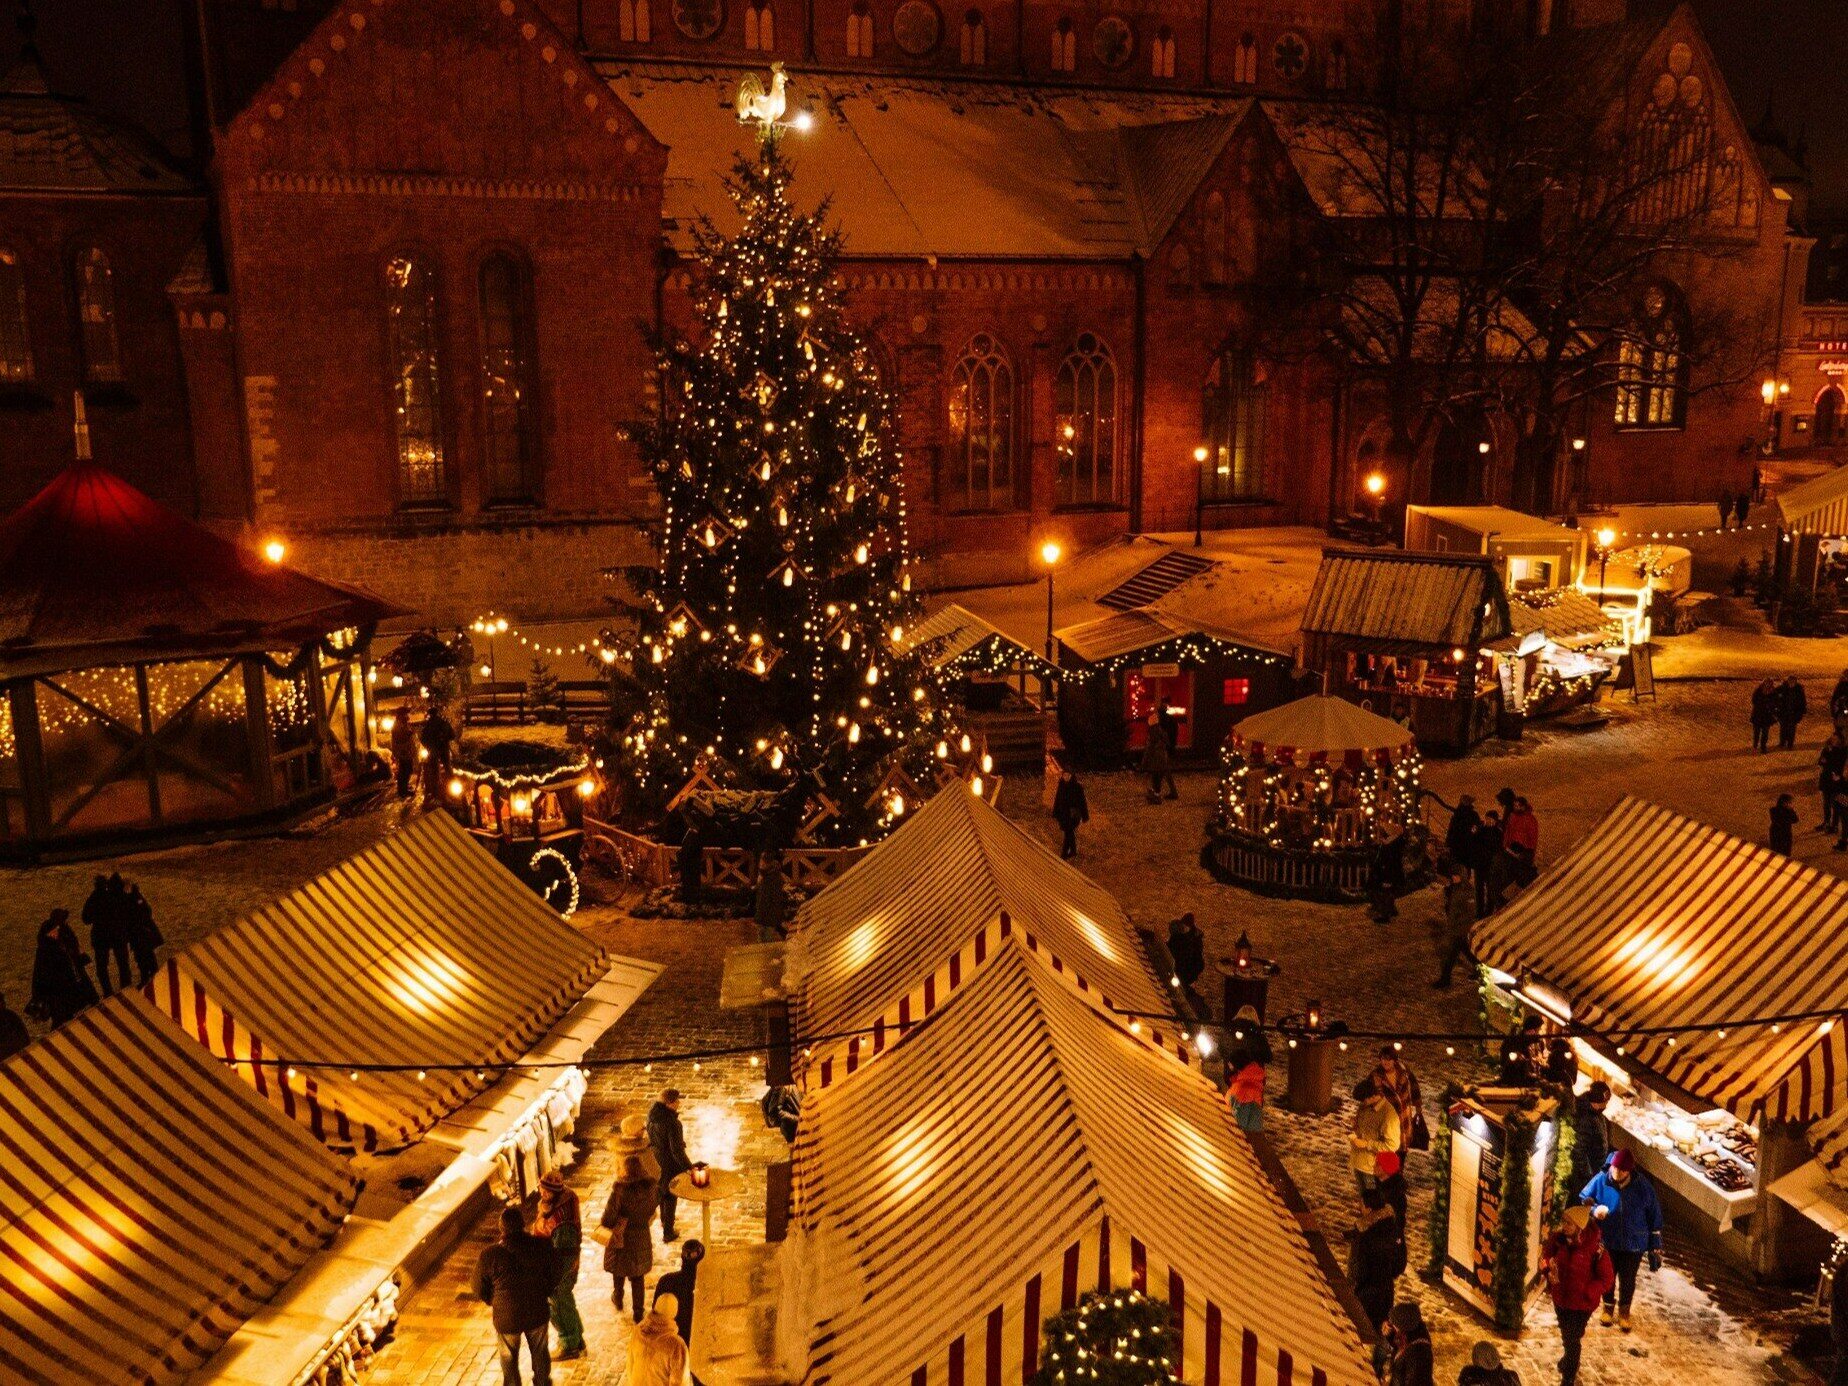 The 6 cheapest Christmas markets in Europe.  One from Poland on the list